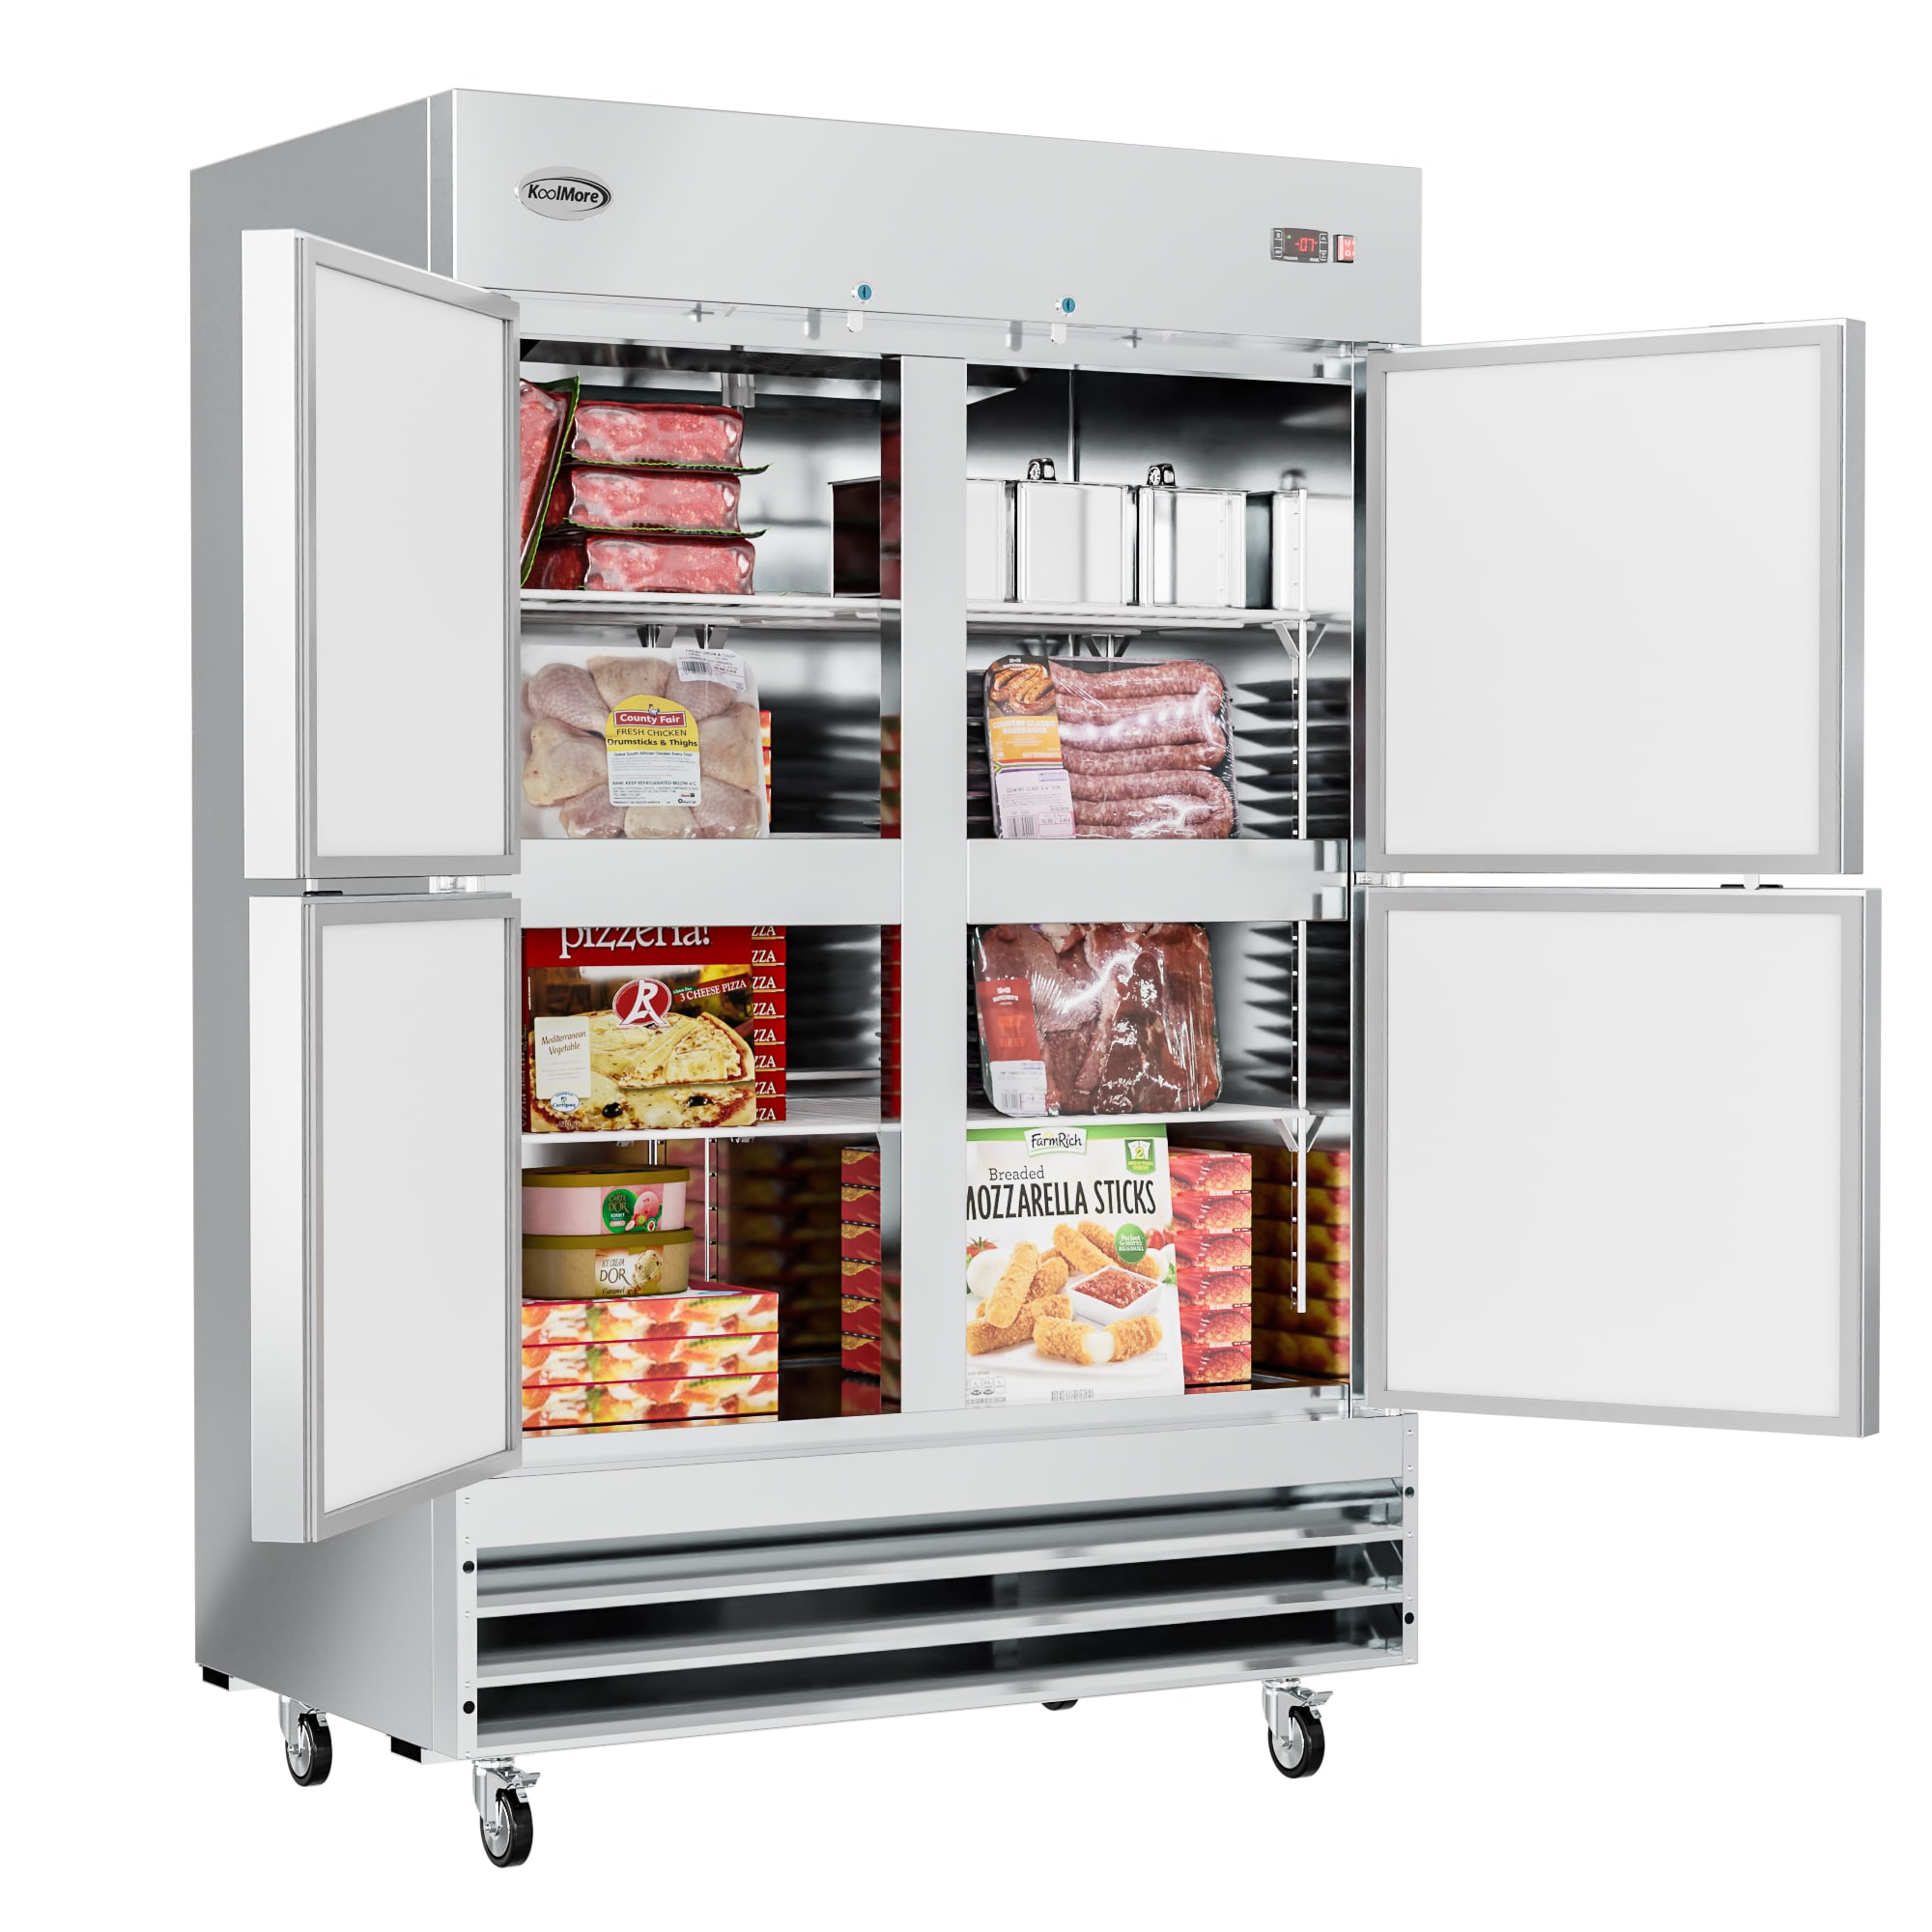 Elite Kitchen Supply 17.7 Cu. ft. Auto-defrost Commercial Upright Reach-In Freezer in Stainless Steel, Silver